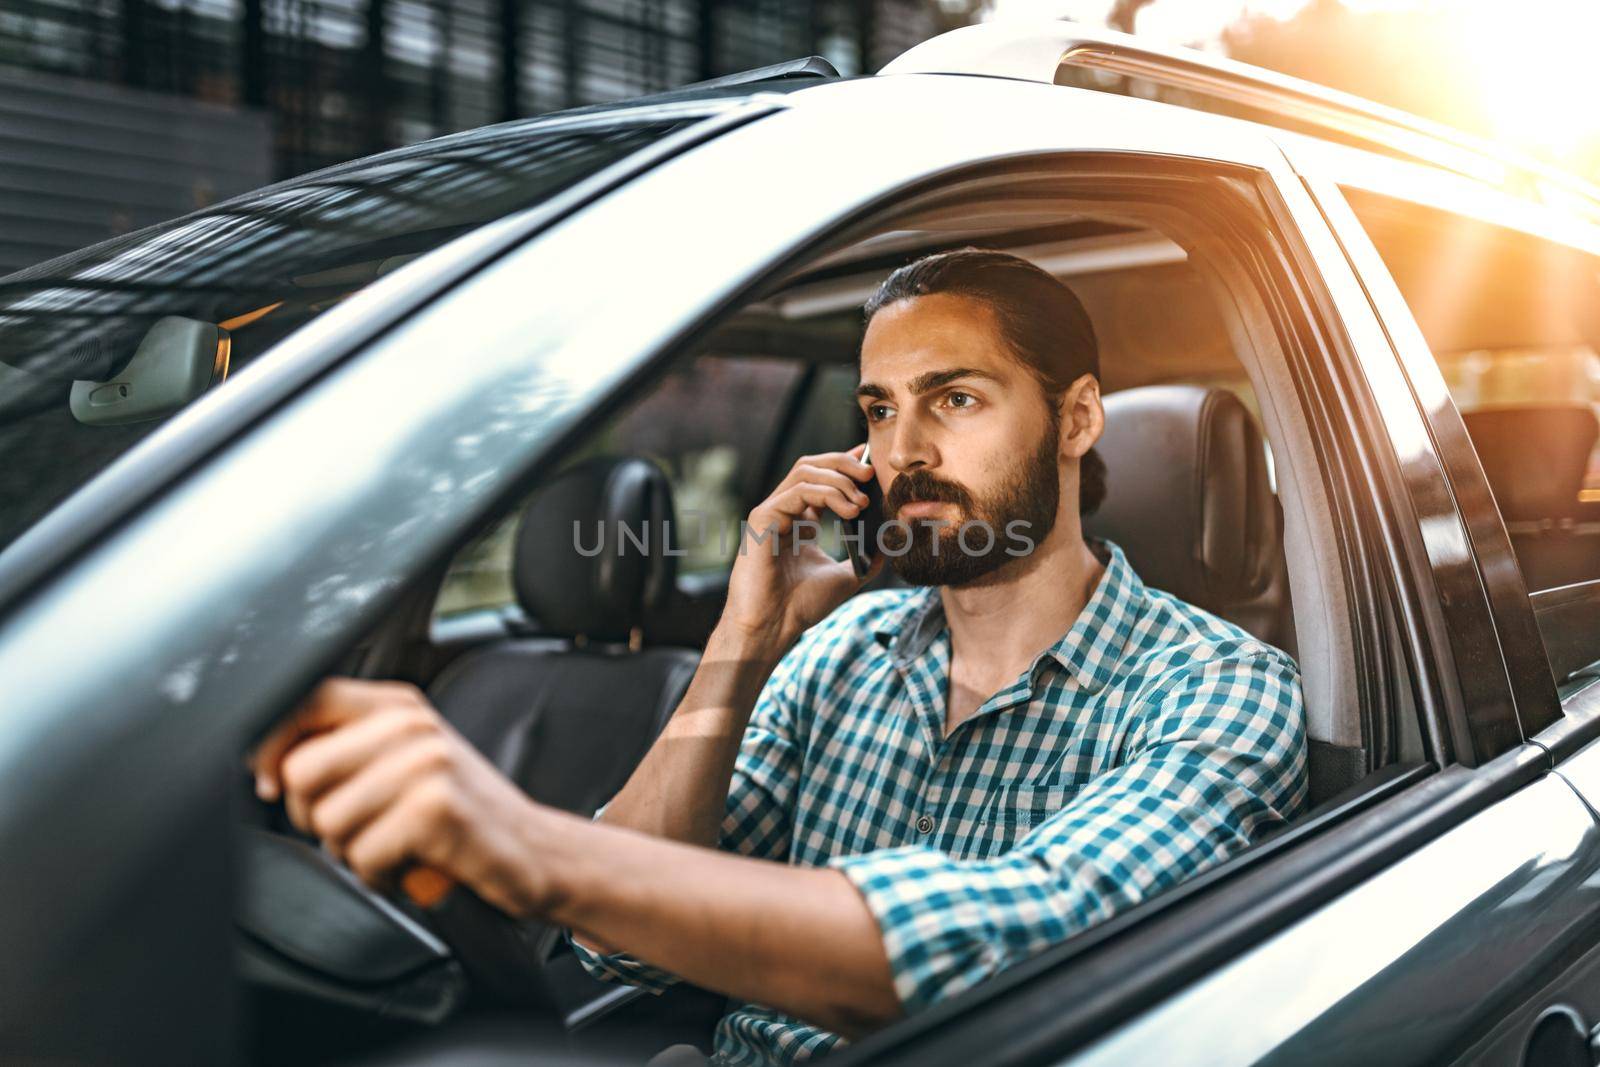 Man is holding smartphone in his hand and talking while driving a car.